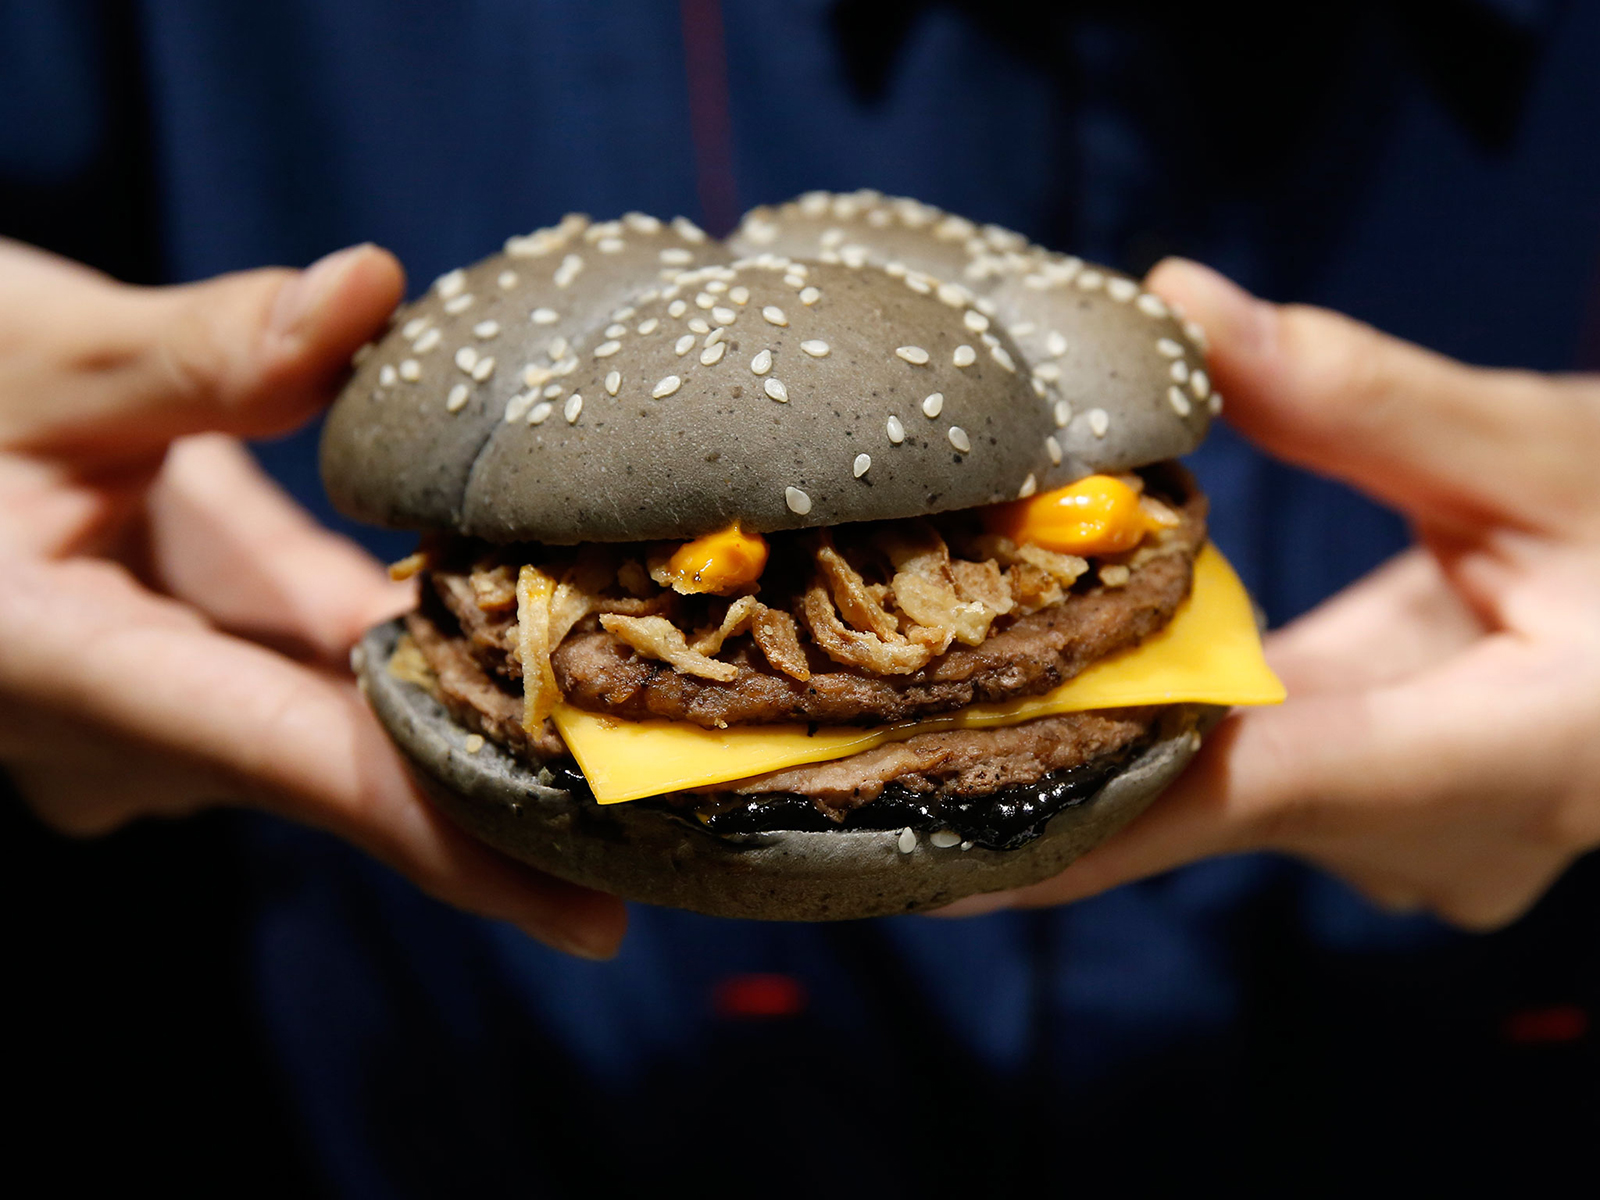 An employee of McDonald's Japan holds an Ikasumi, "squid ink" burger at one of its fast-food outlets in Tokyo in October. McDonald's Japan launched the Halloween-themed black burger, which have buns made from a flour mix of bamboo charcoal powder and black sesame to create the charred look, and beef patties marinated with squid ink sauce. The burger is priced at 370 yen or 3.40 dollars.